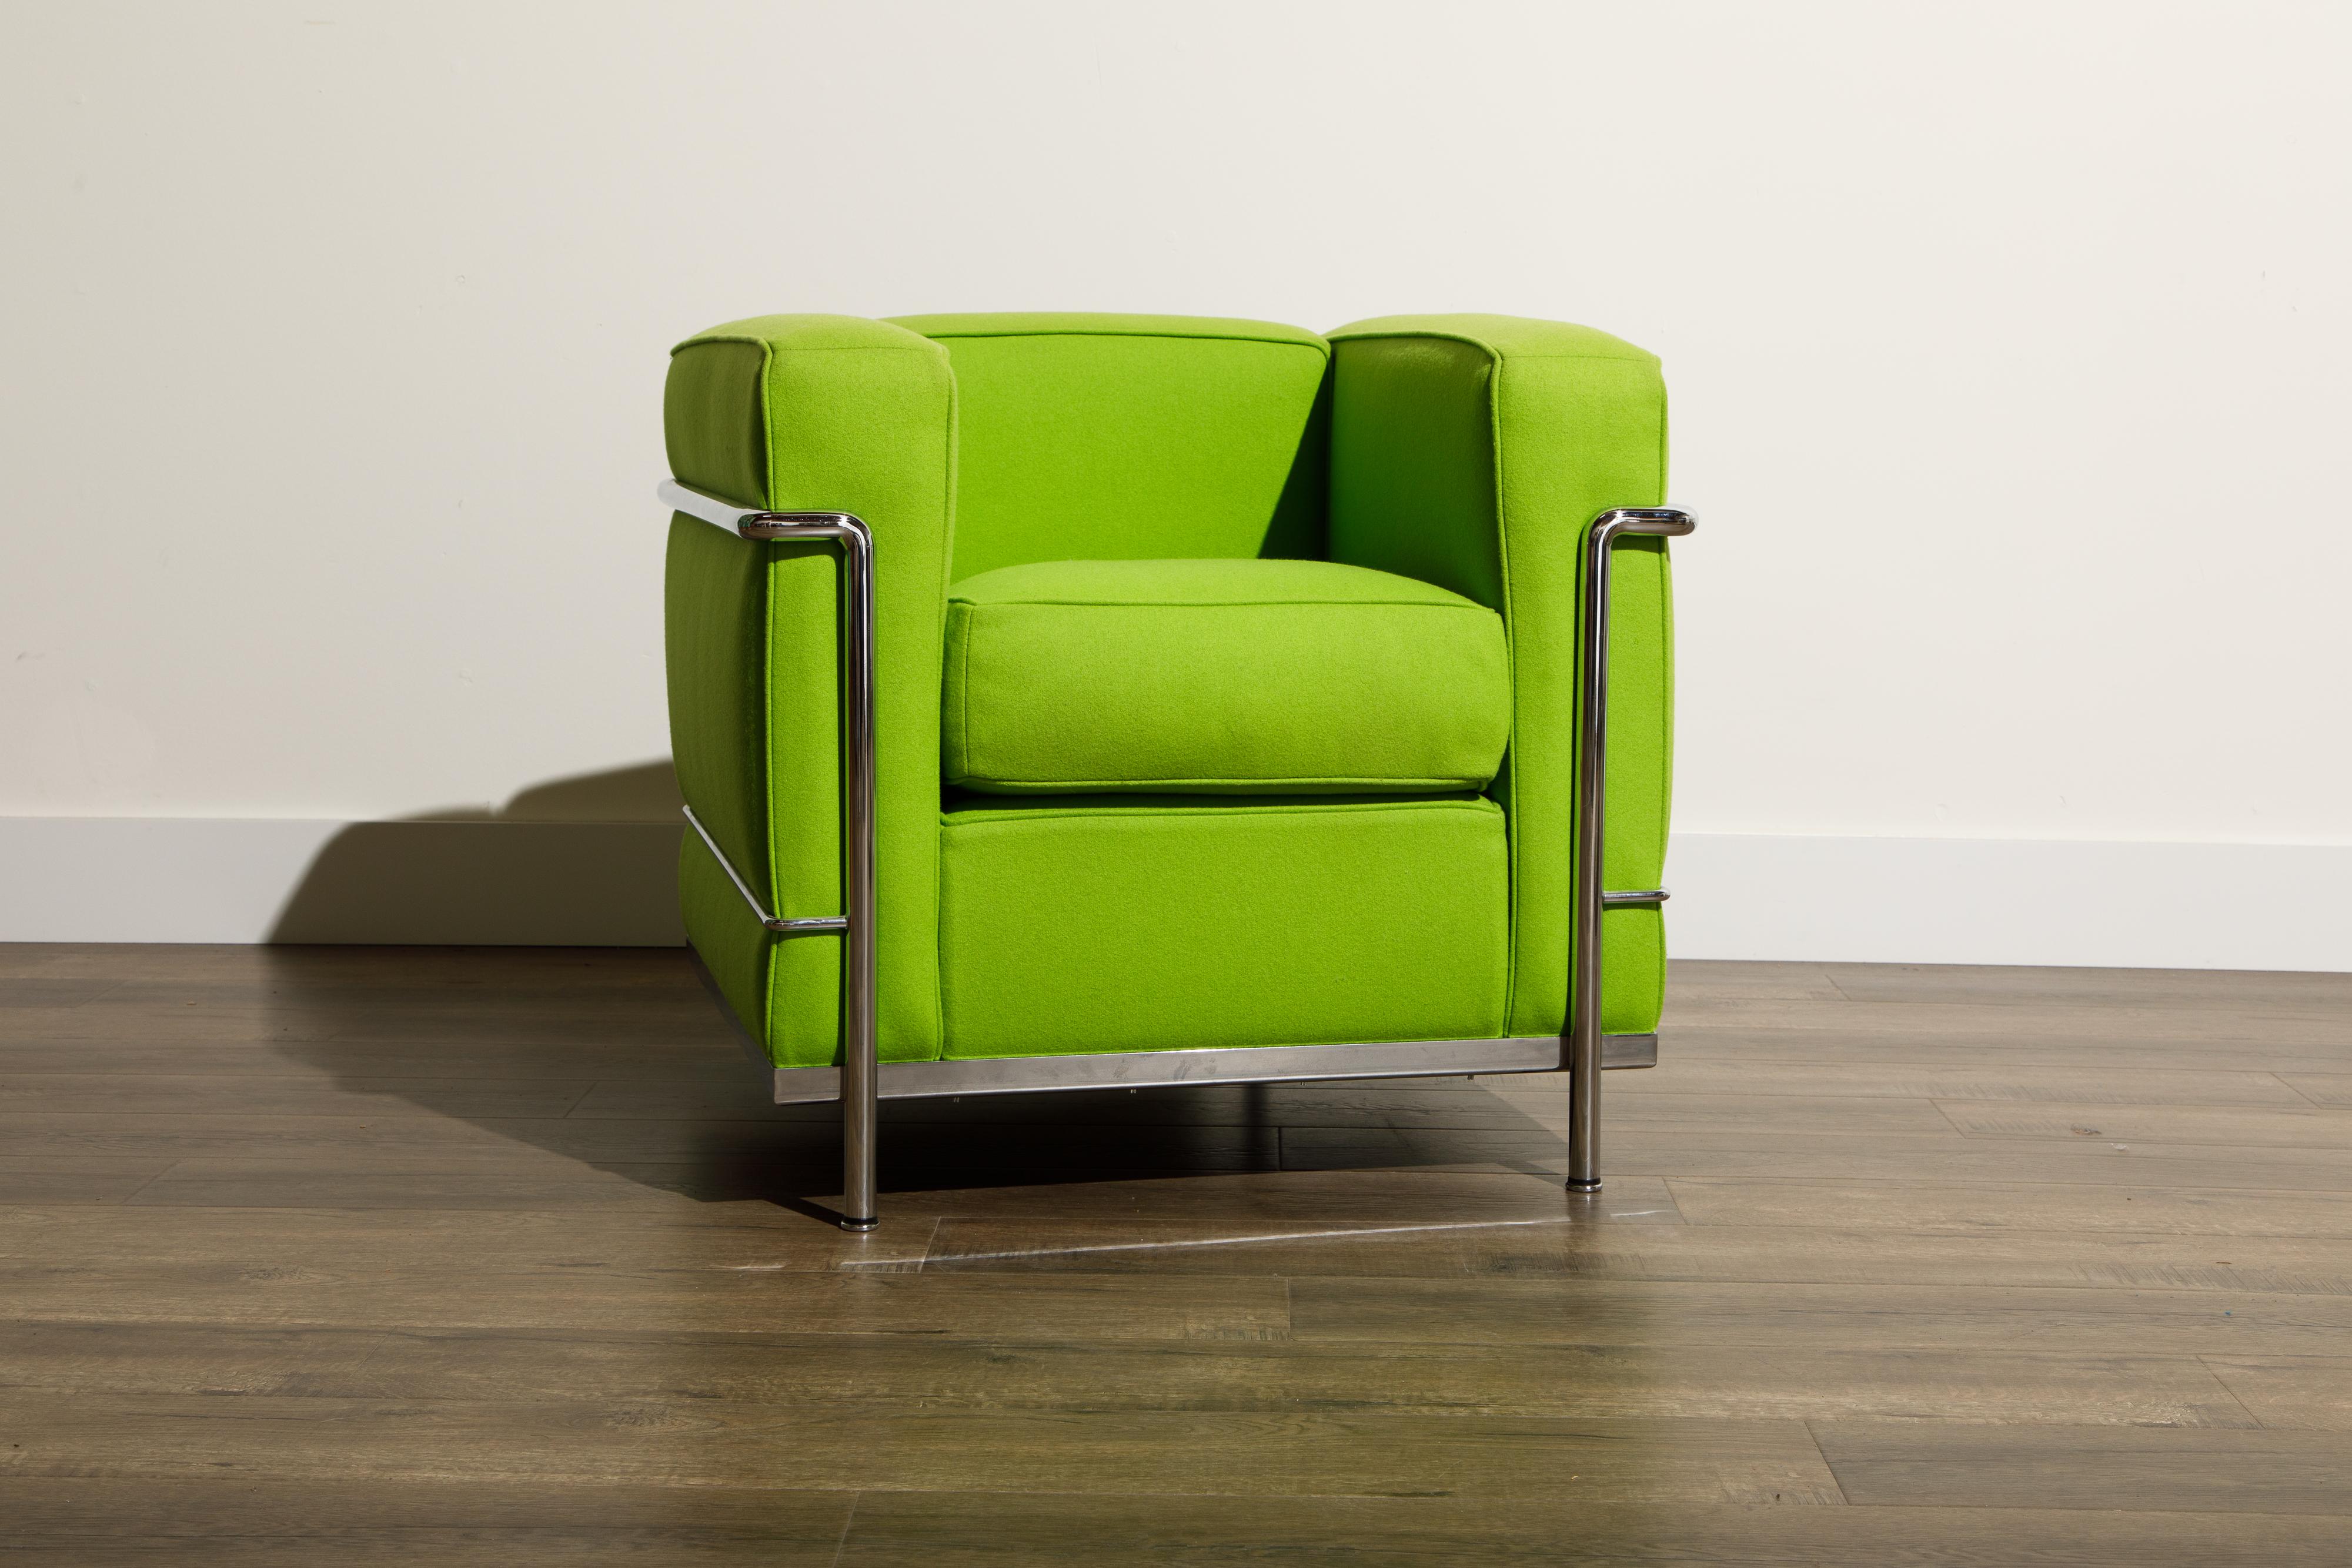 An incredibly comfortable and signed (authentic) 'LC2' Club Chair designed in 1928 by Le Corbusier, Pierre Jeanneret and Charlotte Perriand for Cassina in an interesting day-glo green color fabric. Produced by Cassina from 1965 to today, this